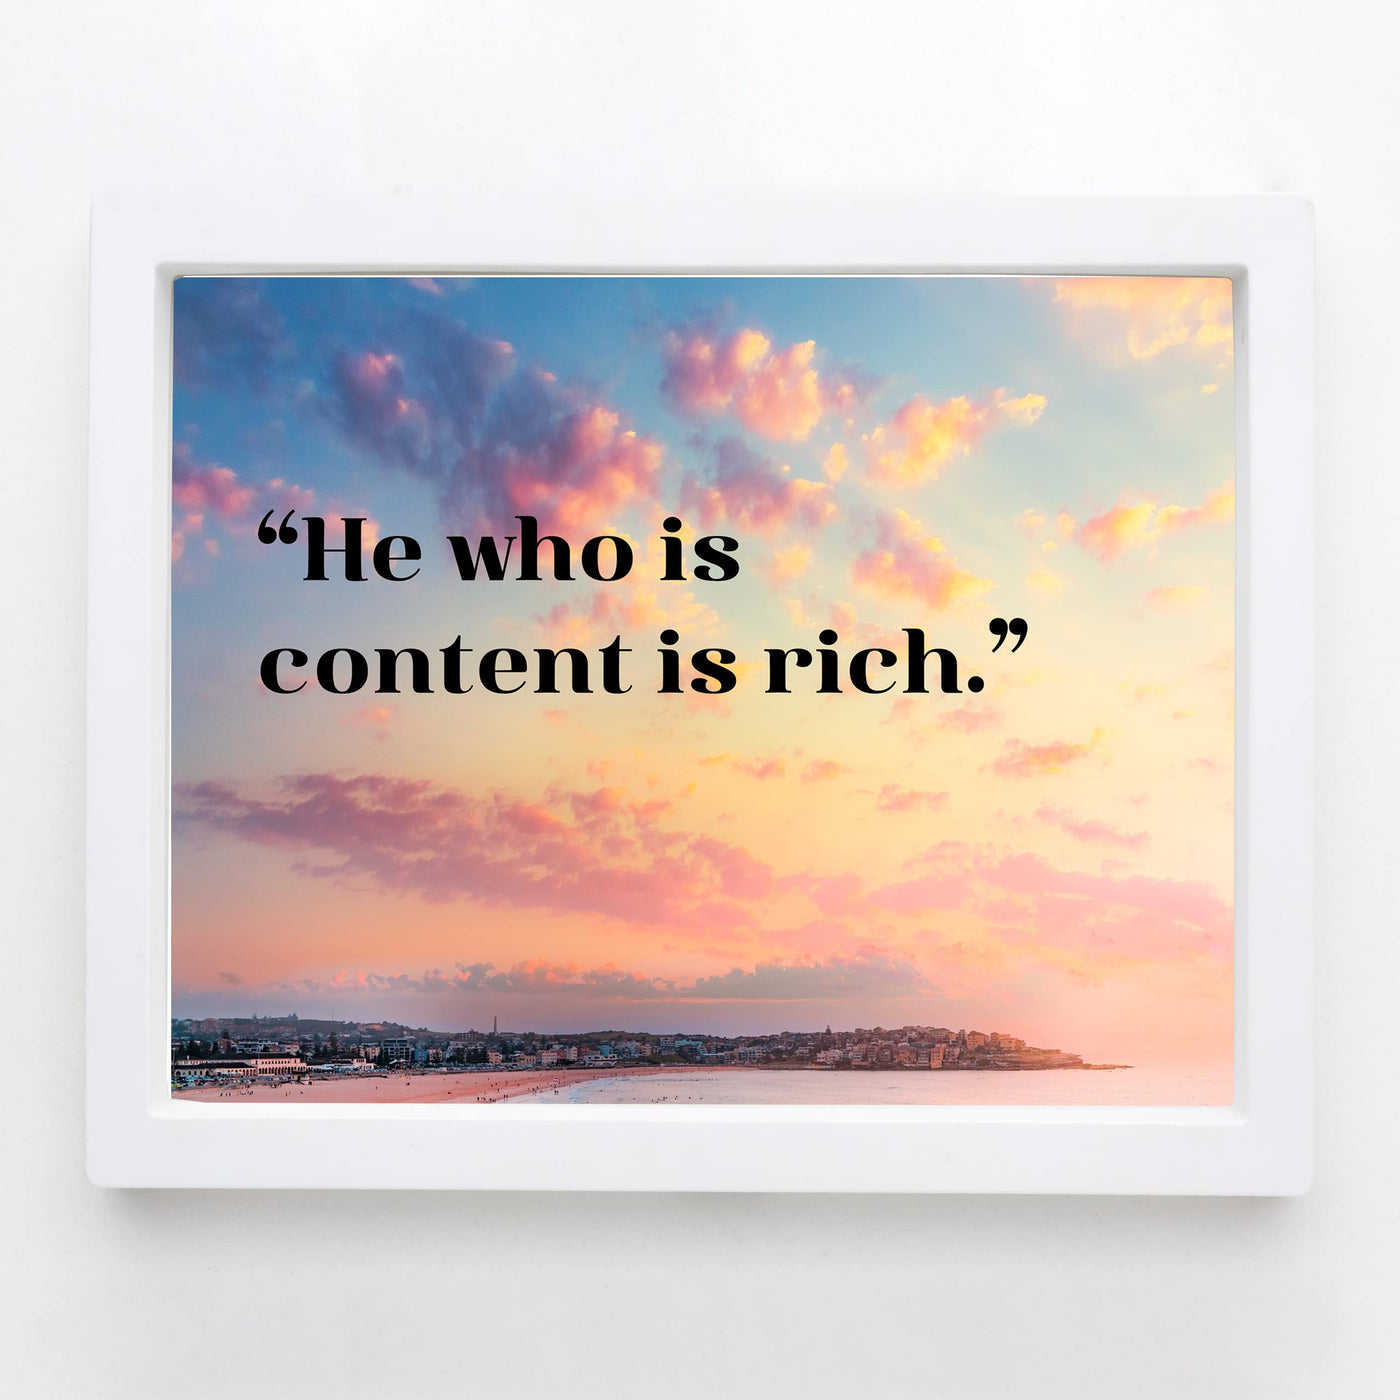 He Who Is Content Is Rich- Inspirational Quotes Wall Art -10 x 8"- Beach Sunset Picture Print -Ready to Frame. Spiritual Decor for Home-Office-School-Ocean Themes. Great Reminder to Be Grateful!